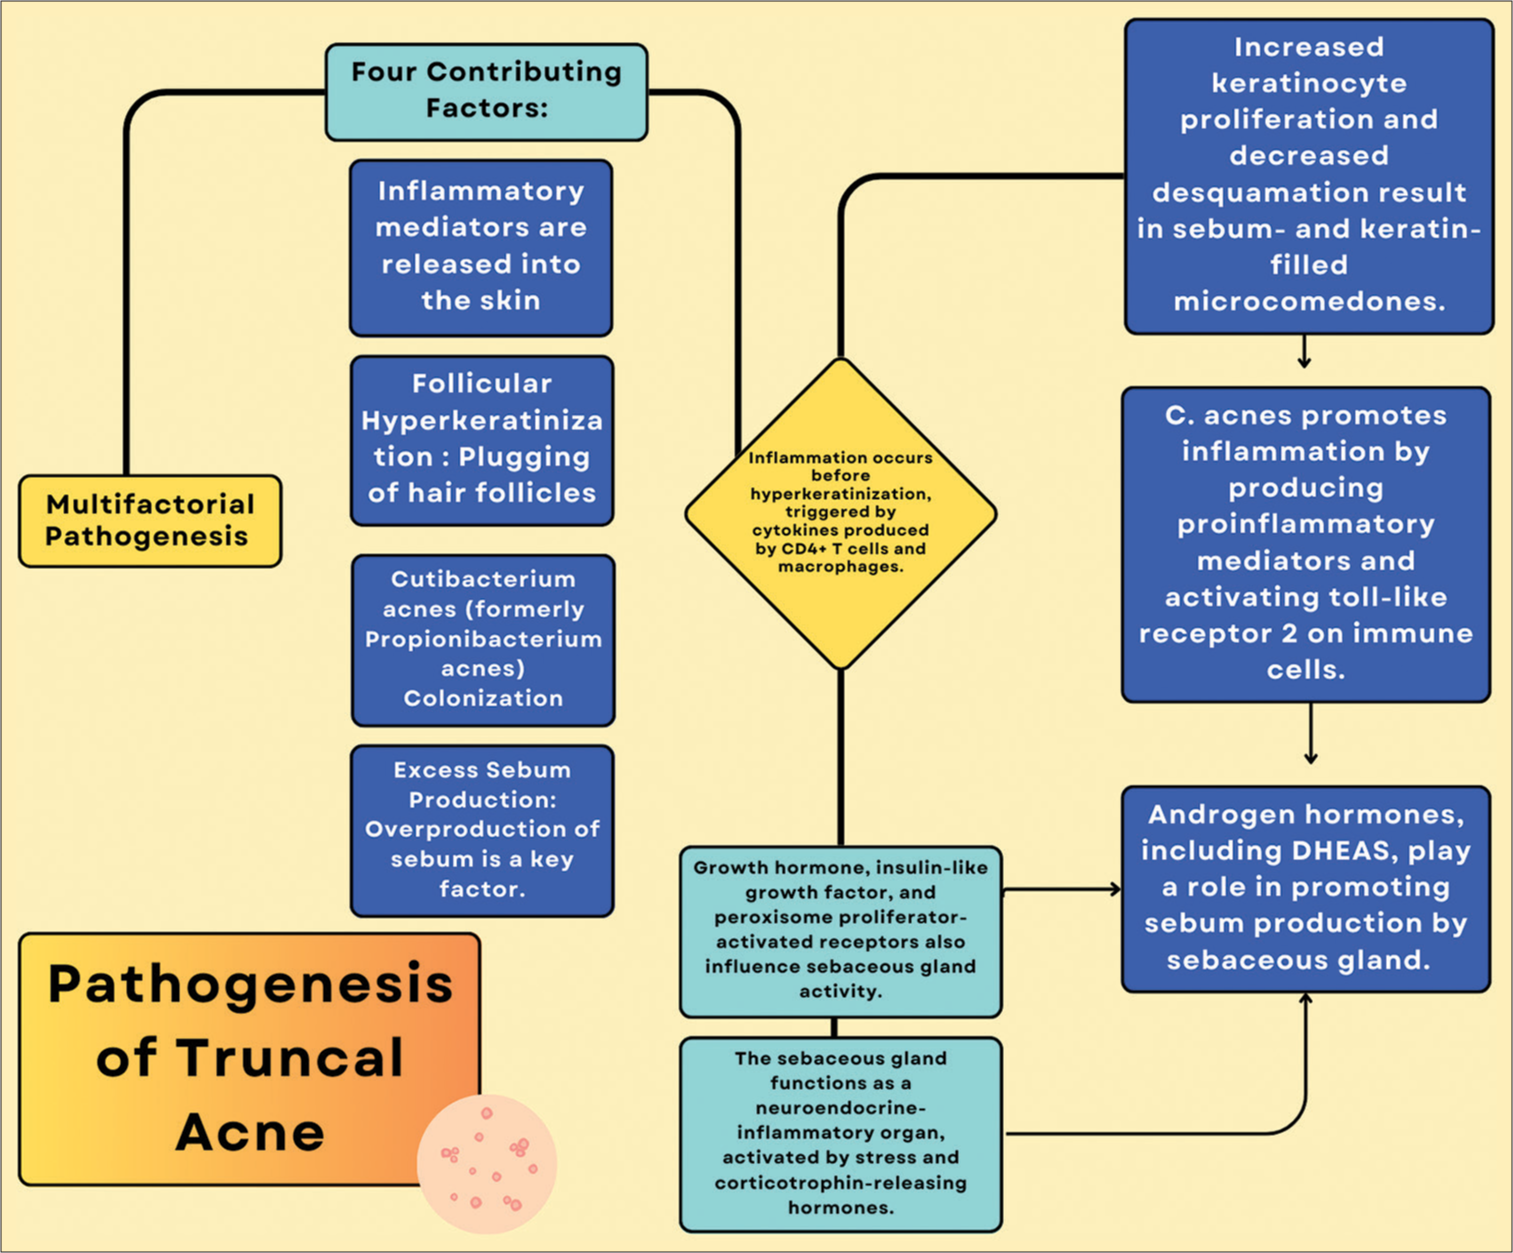 Pathogenesis of truncal acne. Adapted from Rao J.[28]